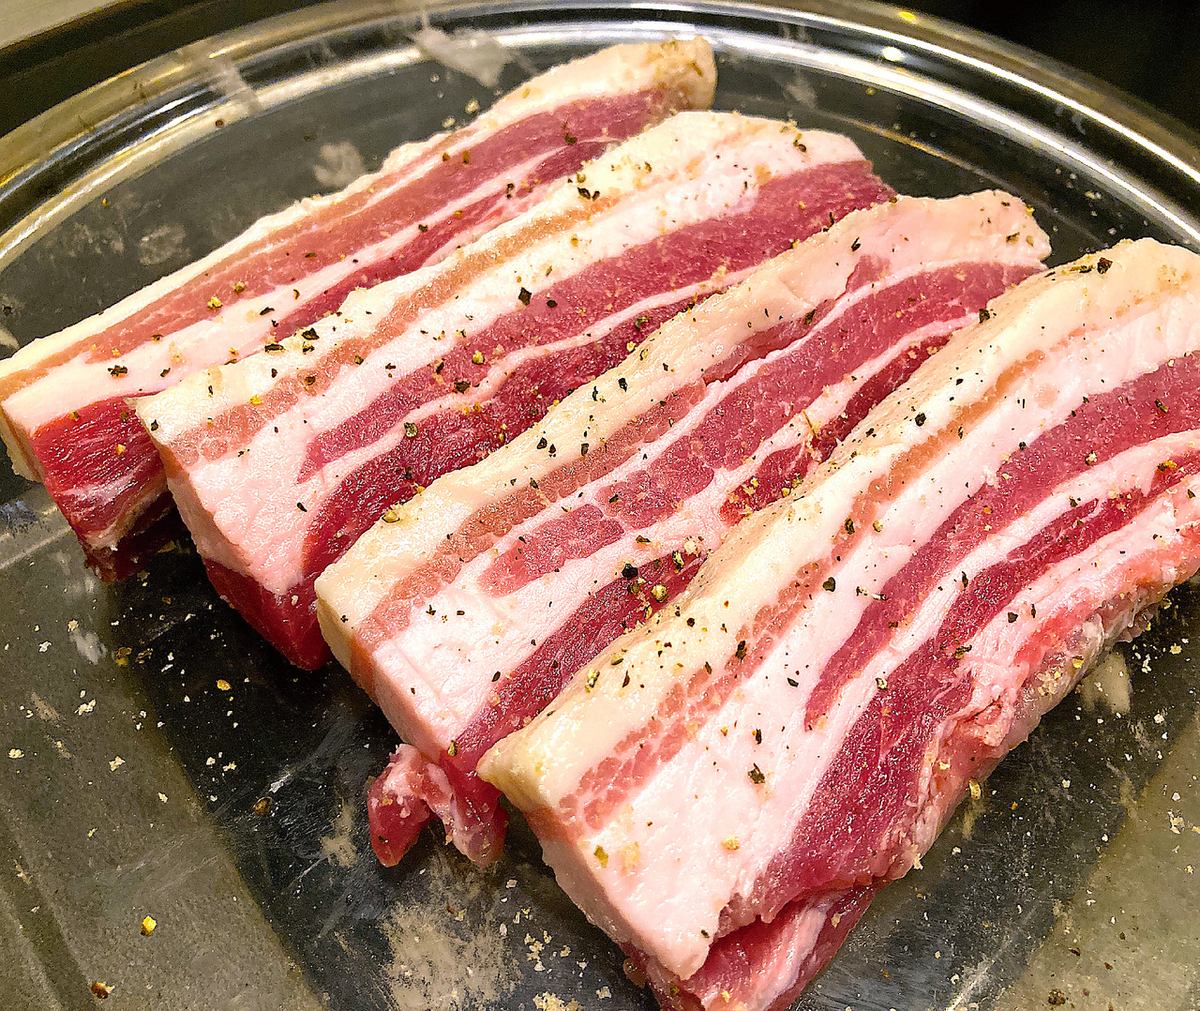 The samgyeopsal meat has been changed to Miyazaki Prefecture's brand pork "Oimo Pork" and it has become even more delicious.